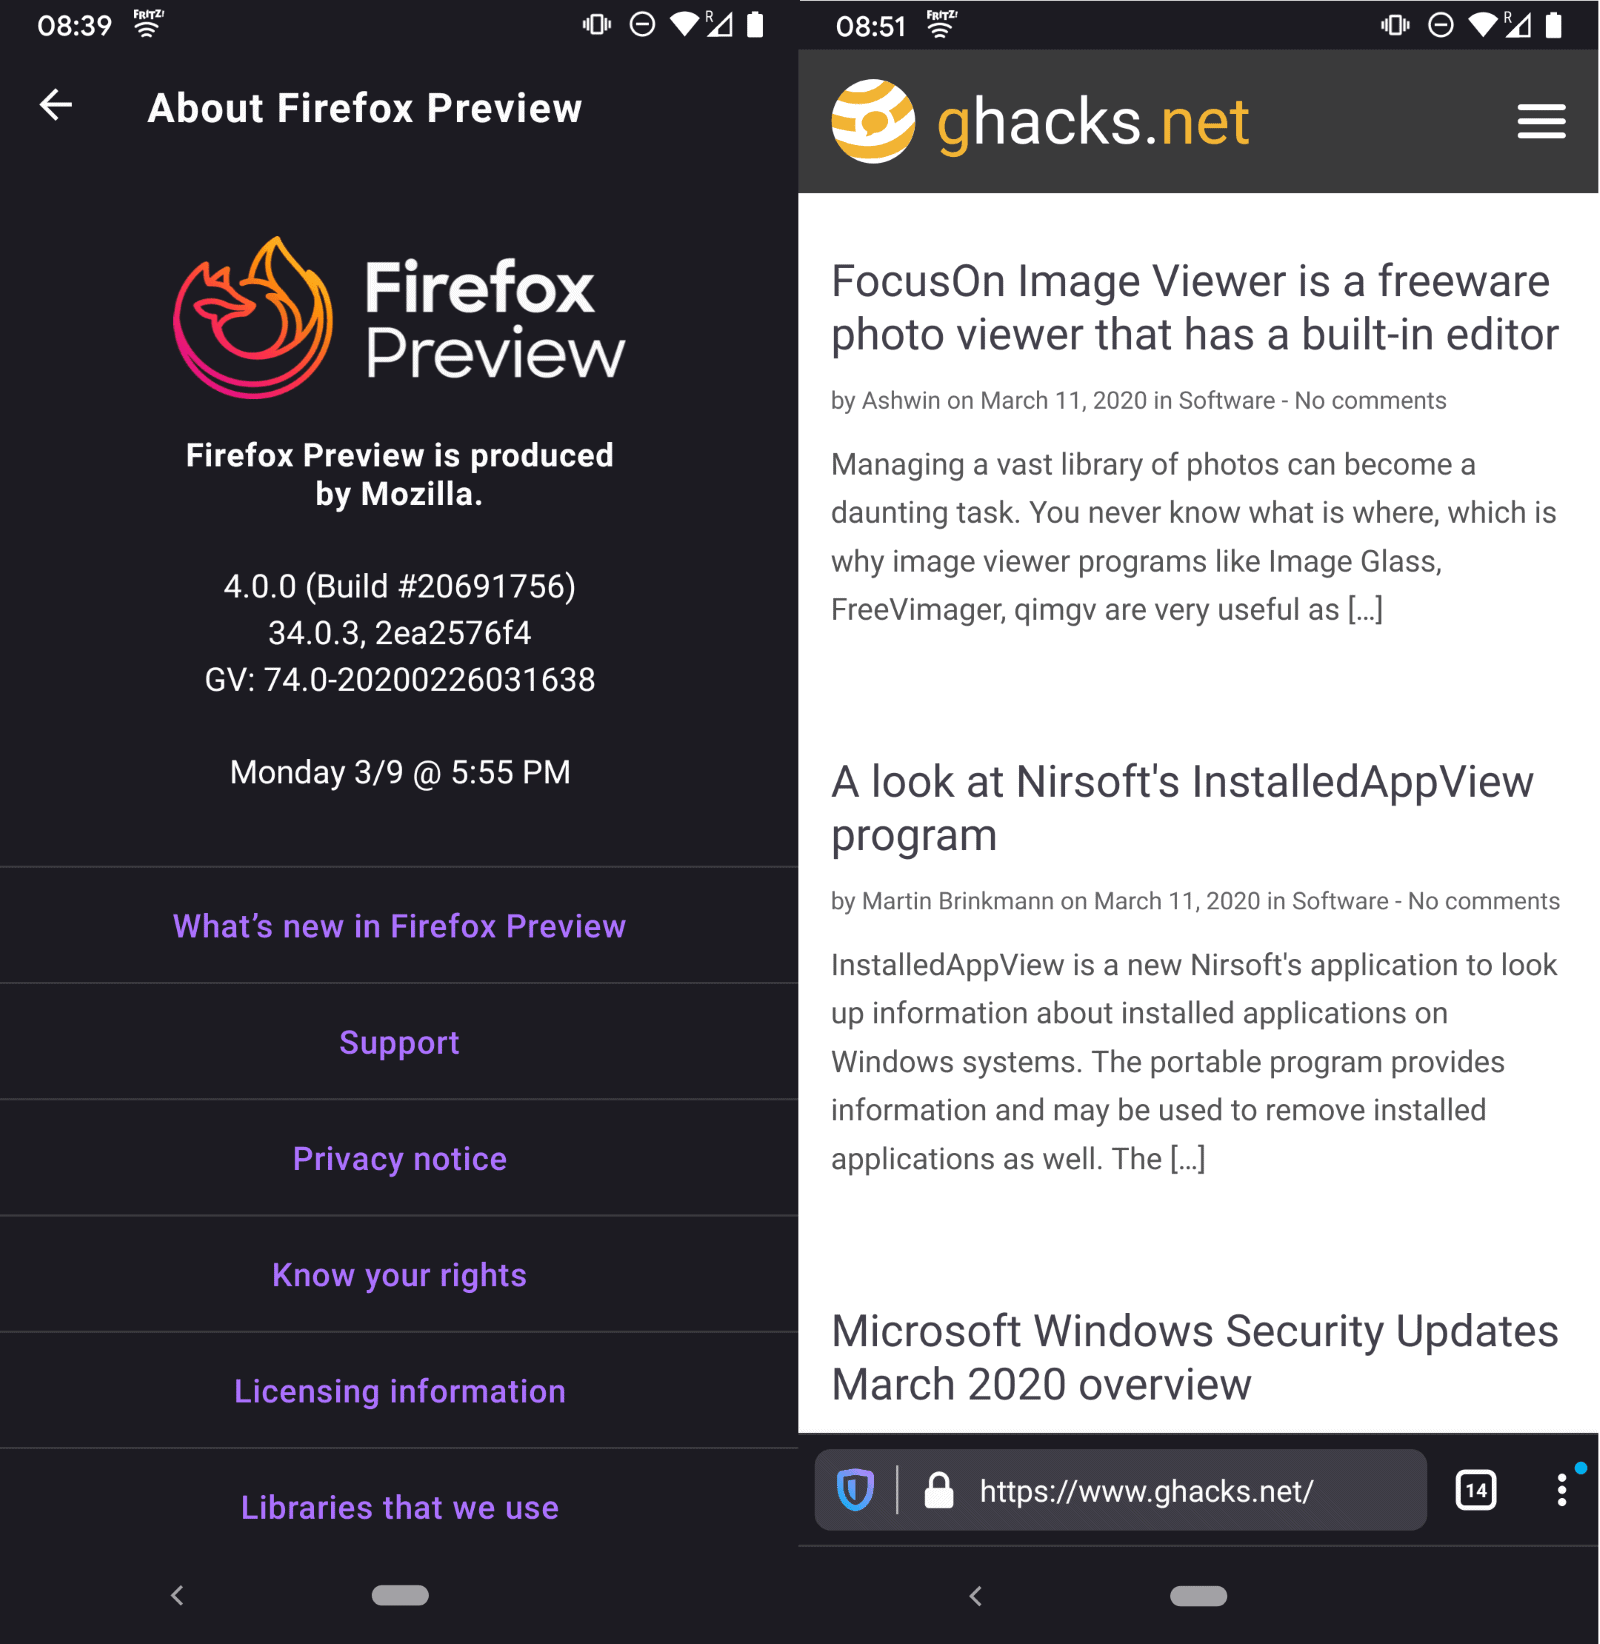 ublock android firefox